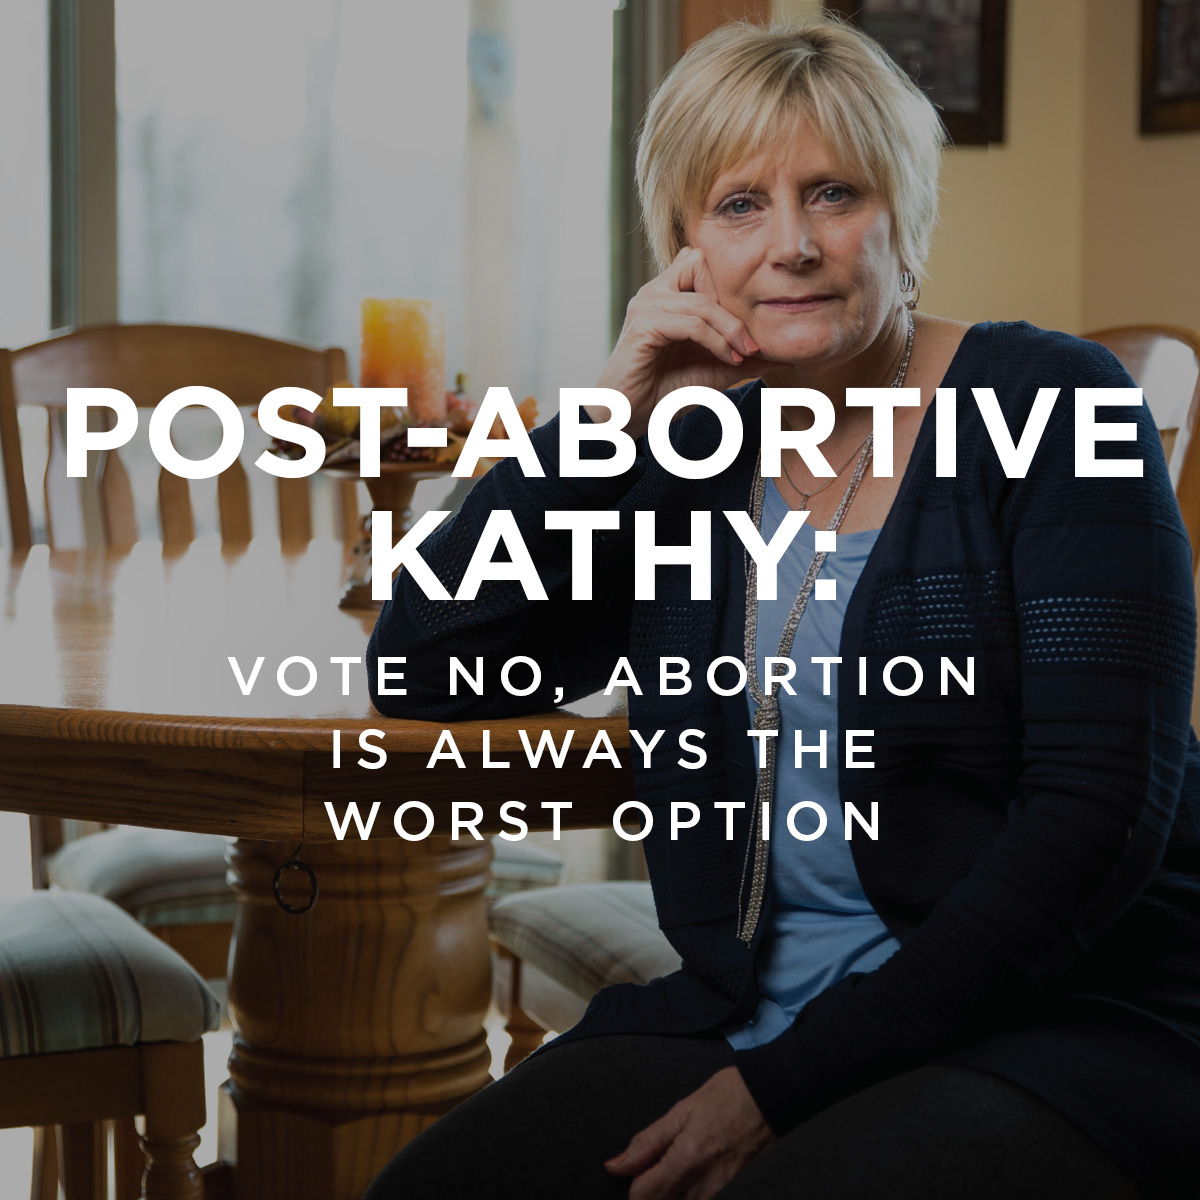 Post-abortive Kathy: Vote no, abortion is always the worst option